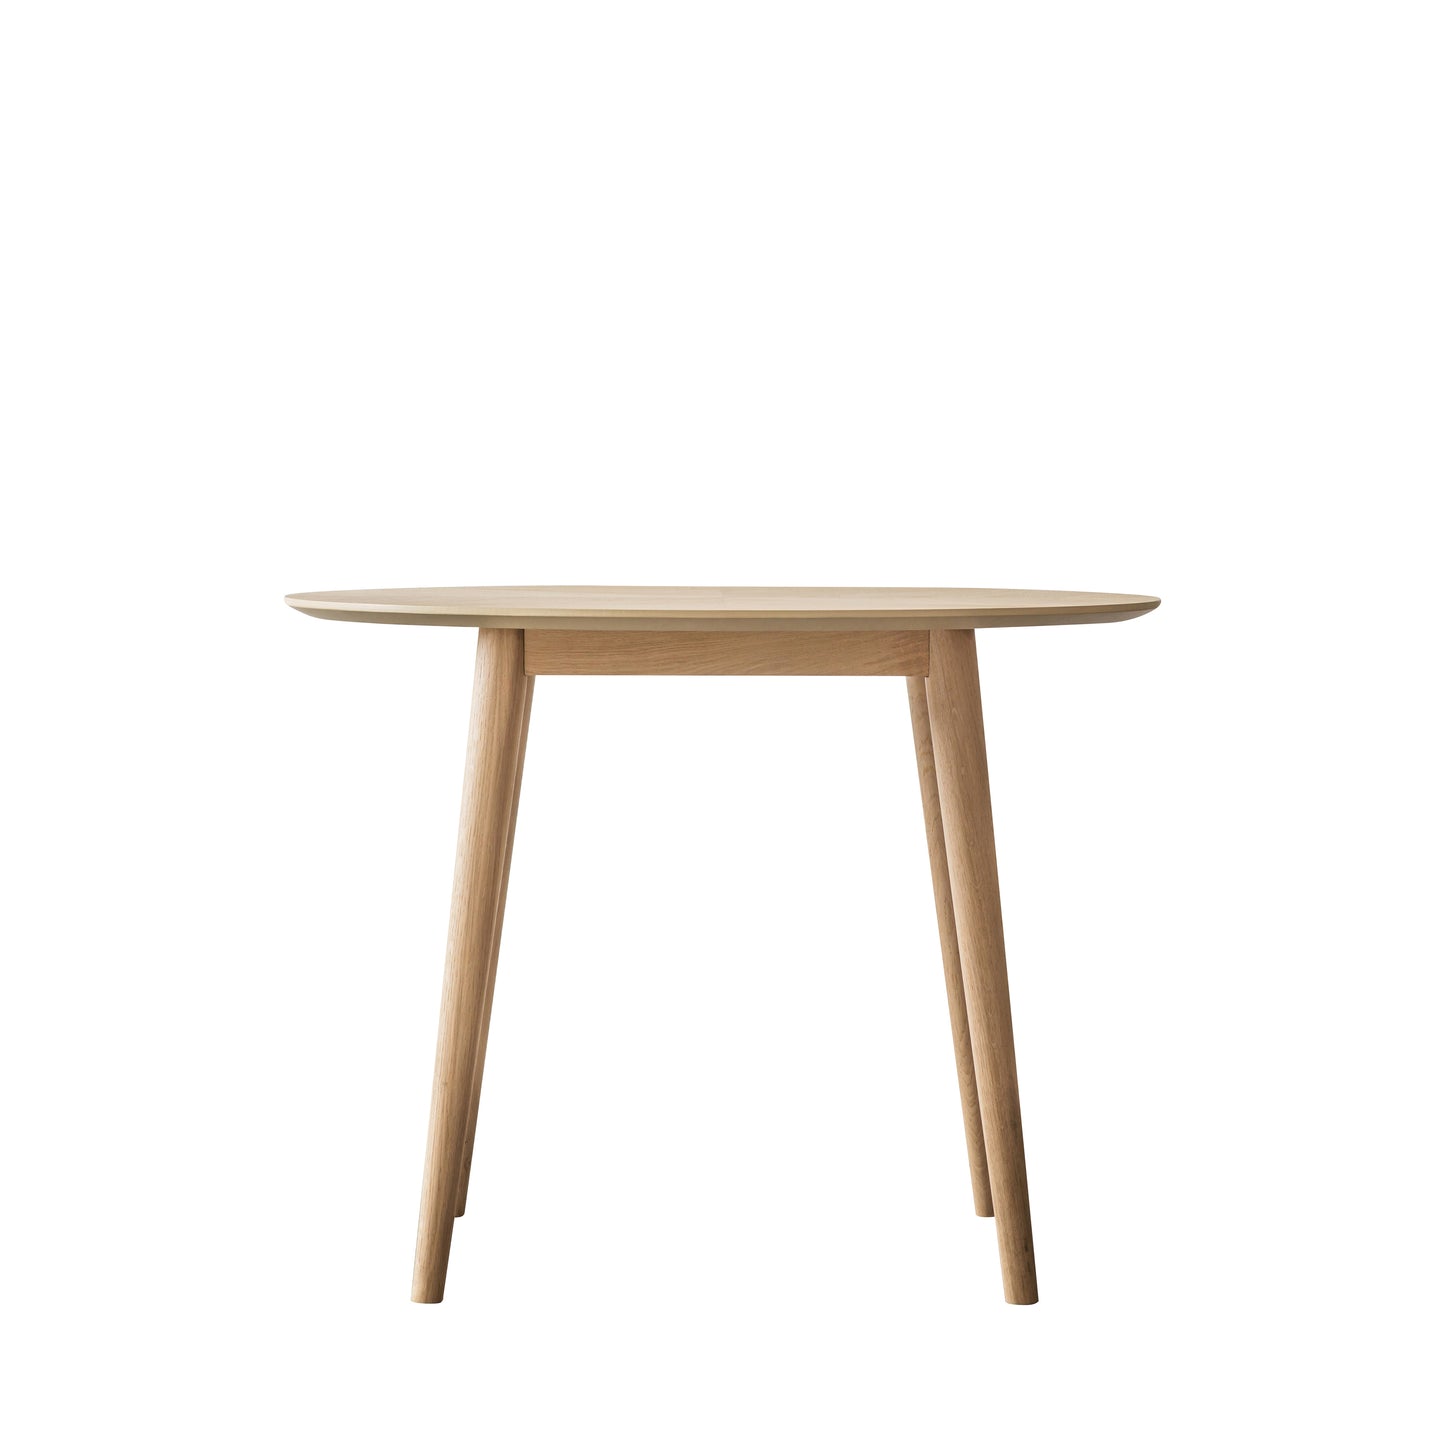 A Tristford Round Dining Table with wooden legs on a white background for interior decor from Kikiathome.co.uk.